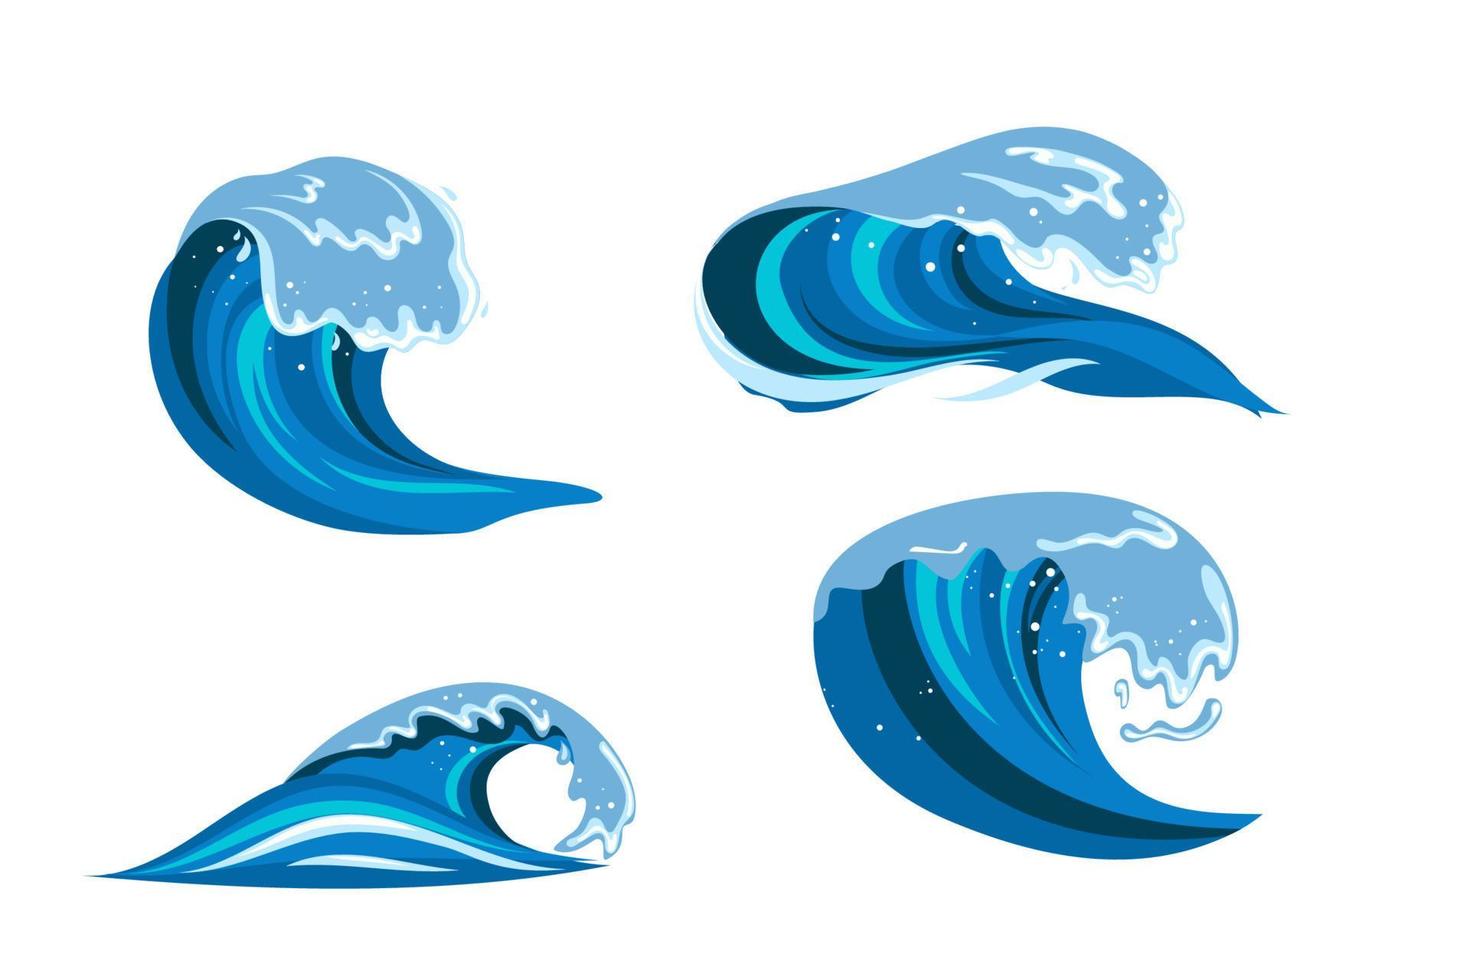 Tsumani wave in flat cartoon style. Big blue tropical water splash with white foam. Vector illustration isolated in white background